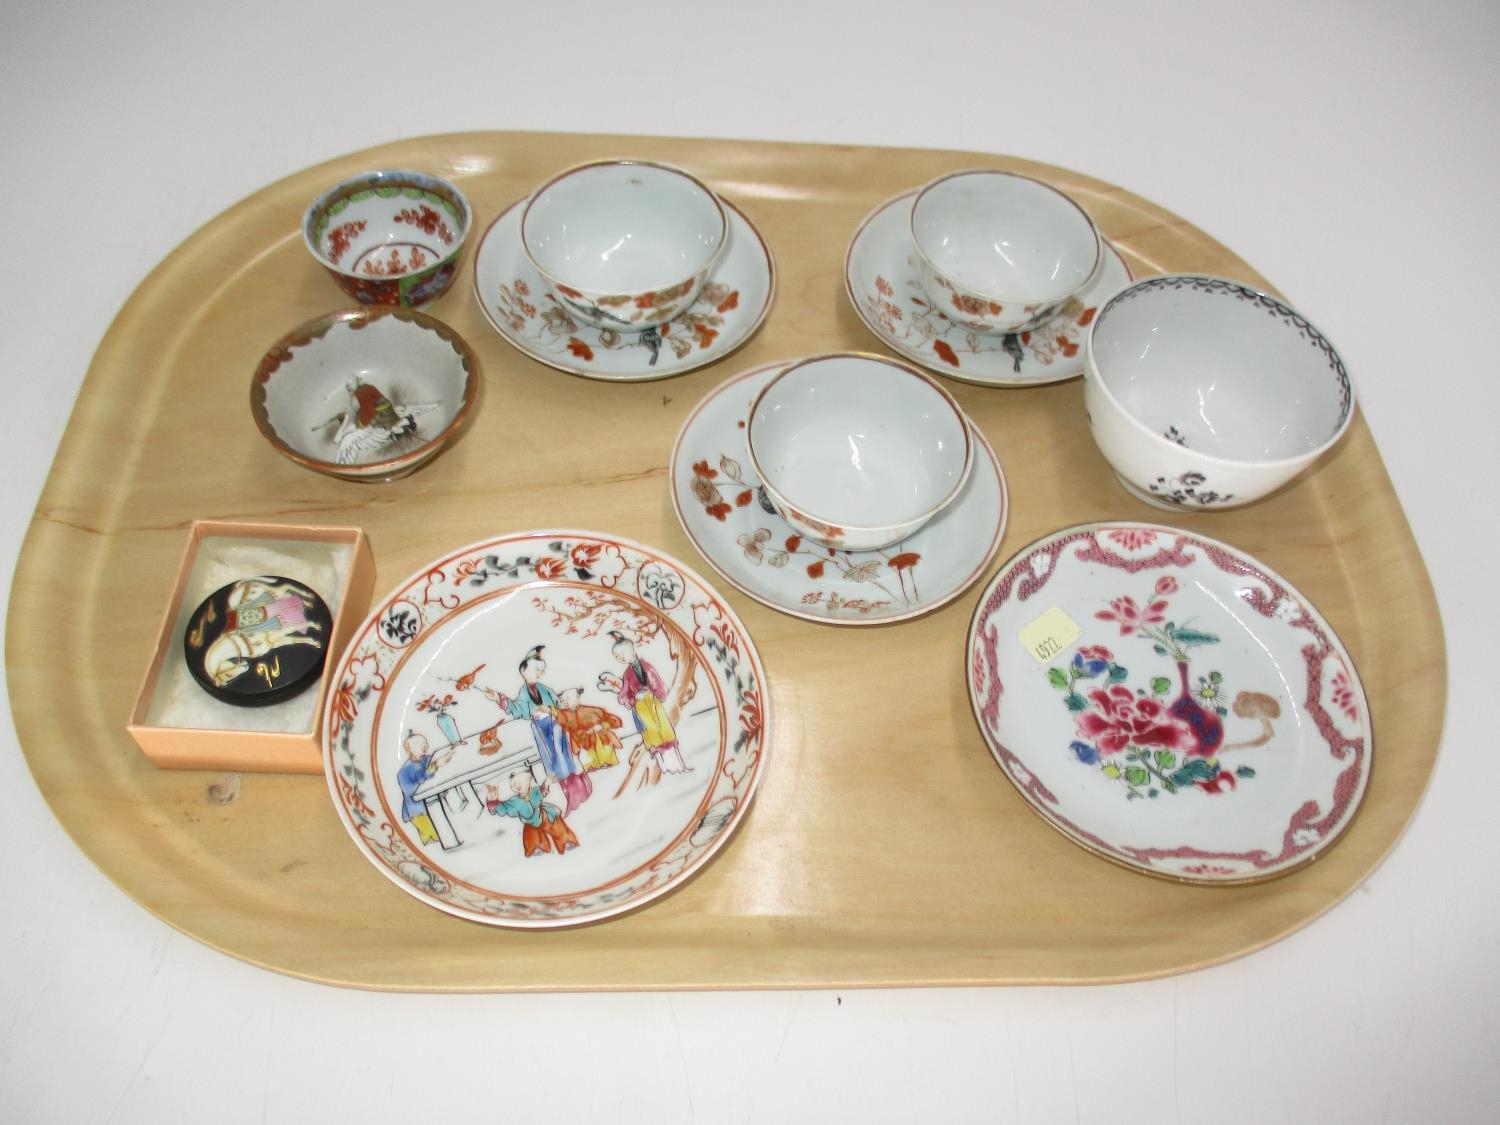 Collection of Late 18th/Early 19th Century Chinese Export Porcelain Tea Bowls and Saucers etc